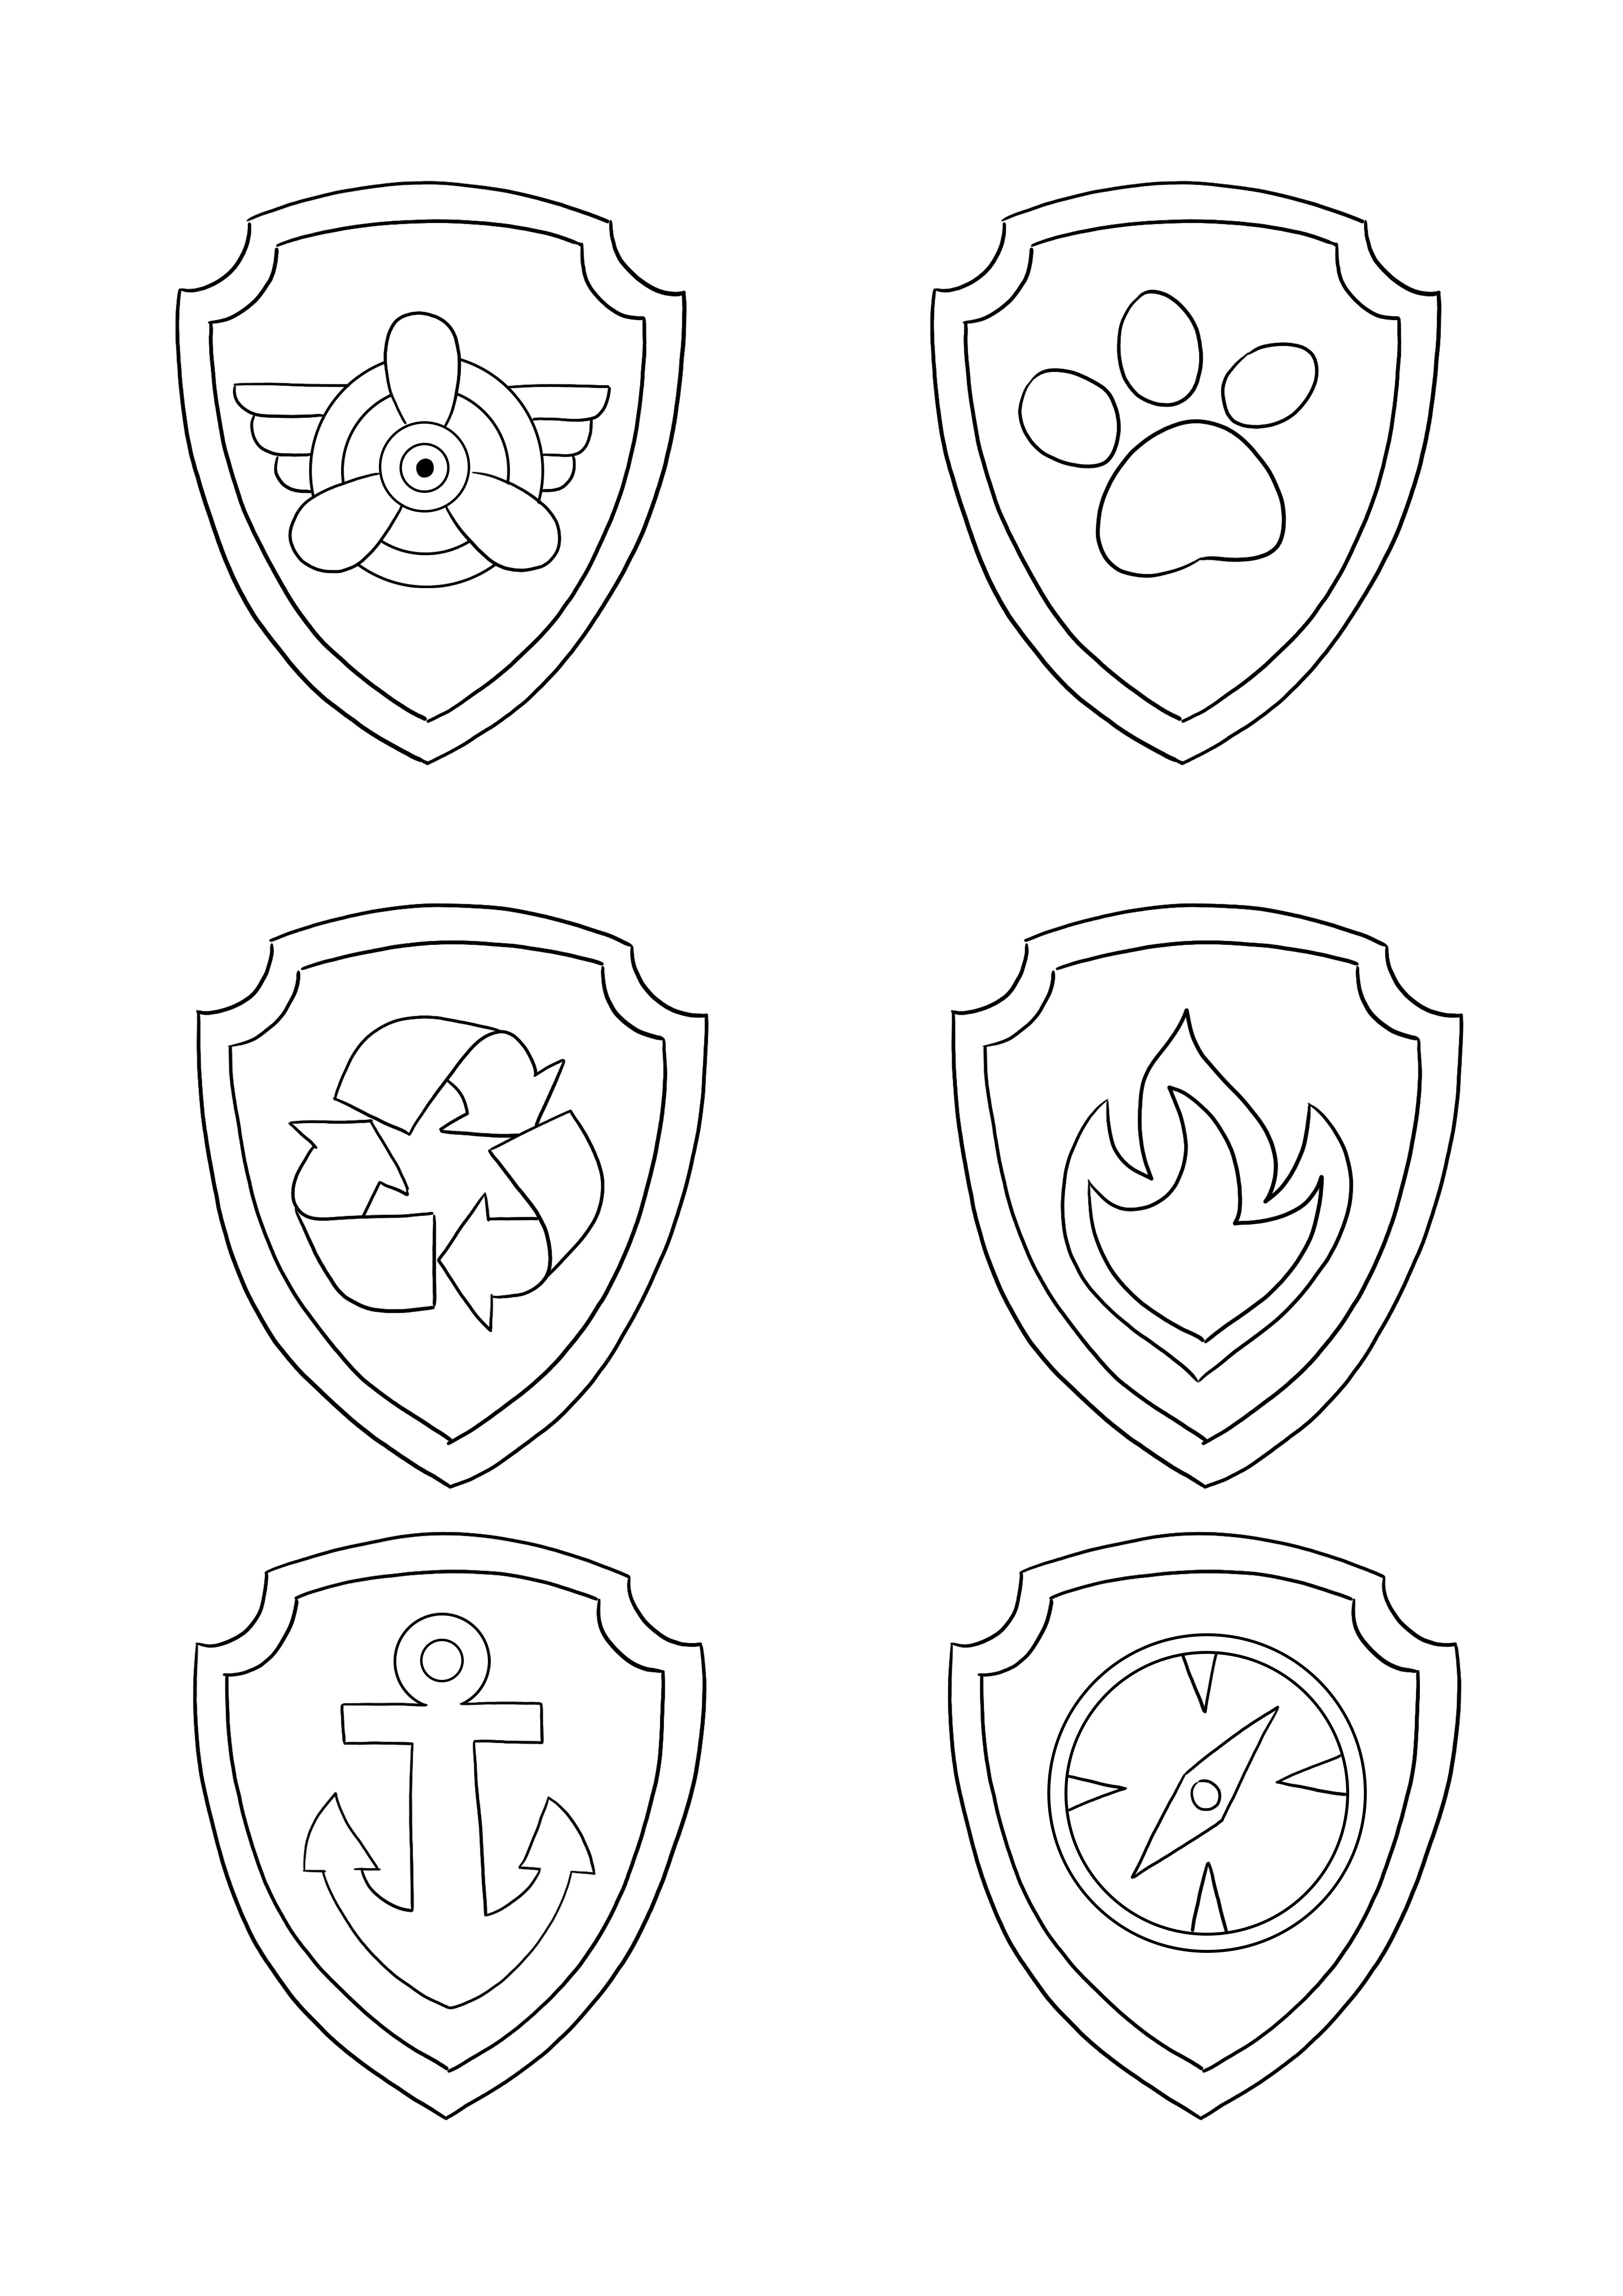 Paw Patrol badges coloring sheet for kids to color and print for free